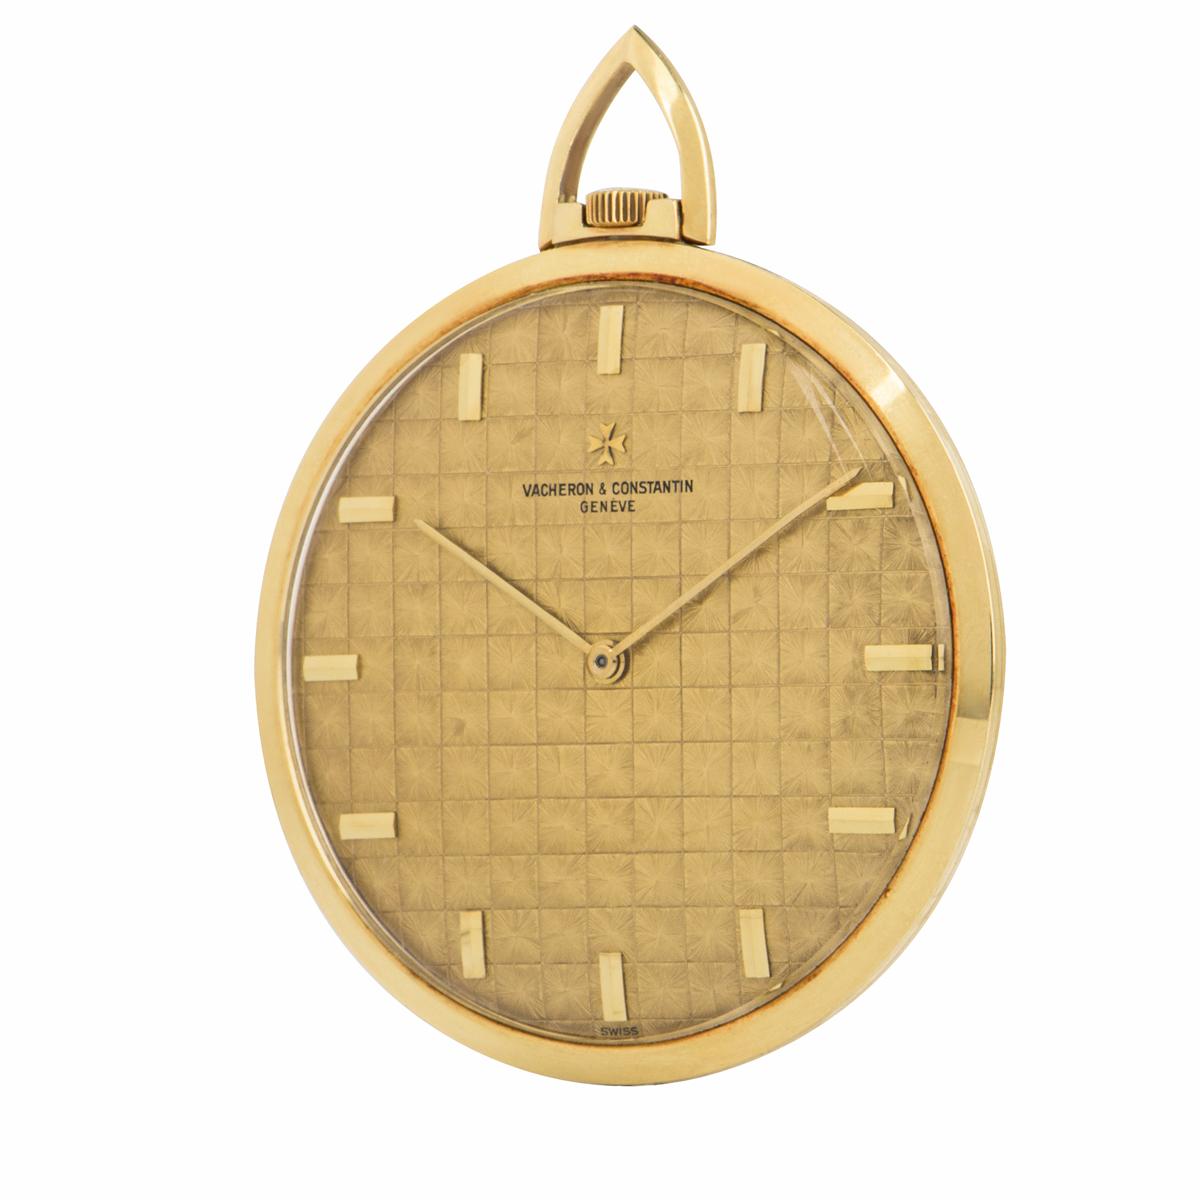 A Vacheron Constantin 18ct yellow gold open face dress pocket watch, C1960s.

Dial: A rare and unusual textured gold dial with a different style of baton layout to the dial makes this watch a very collectable item.

Case: The slim yellow gold case